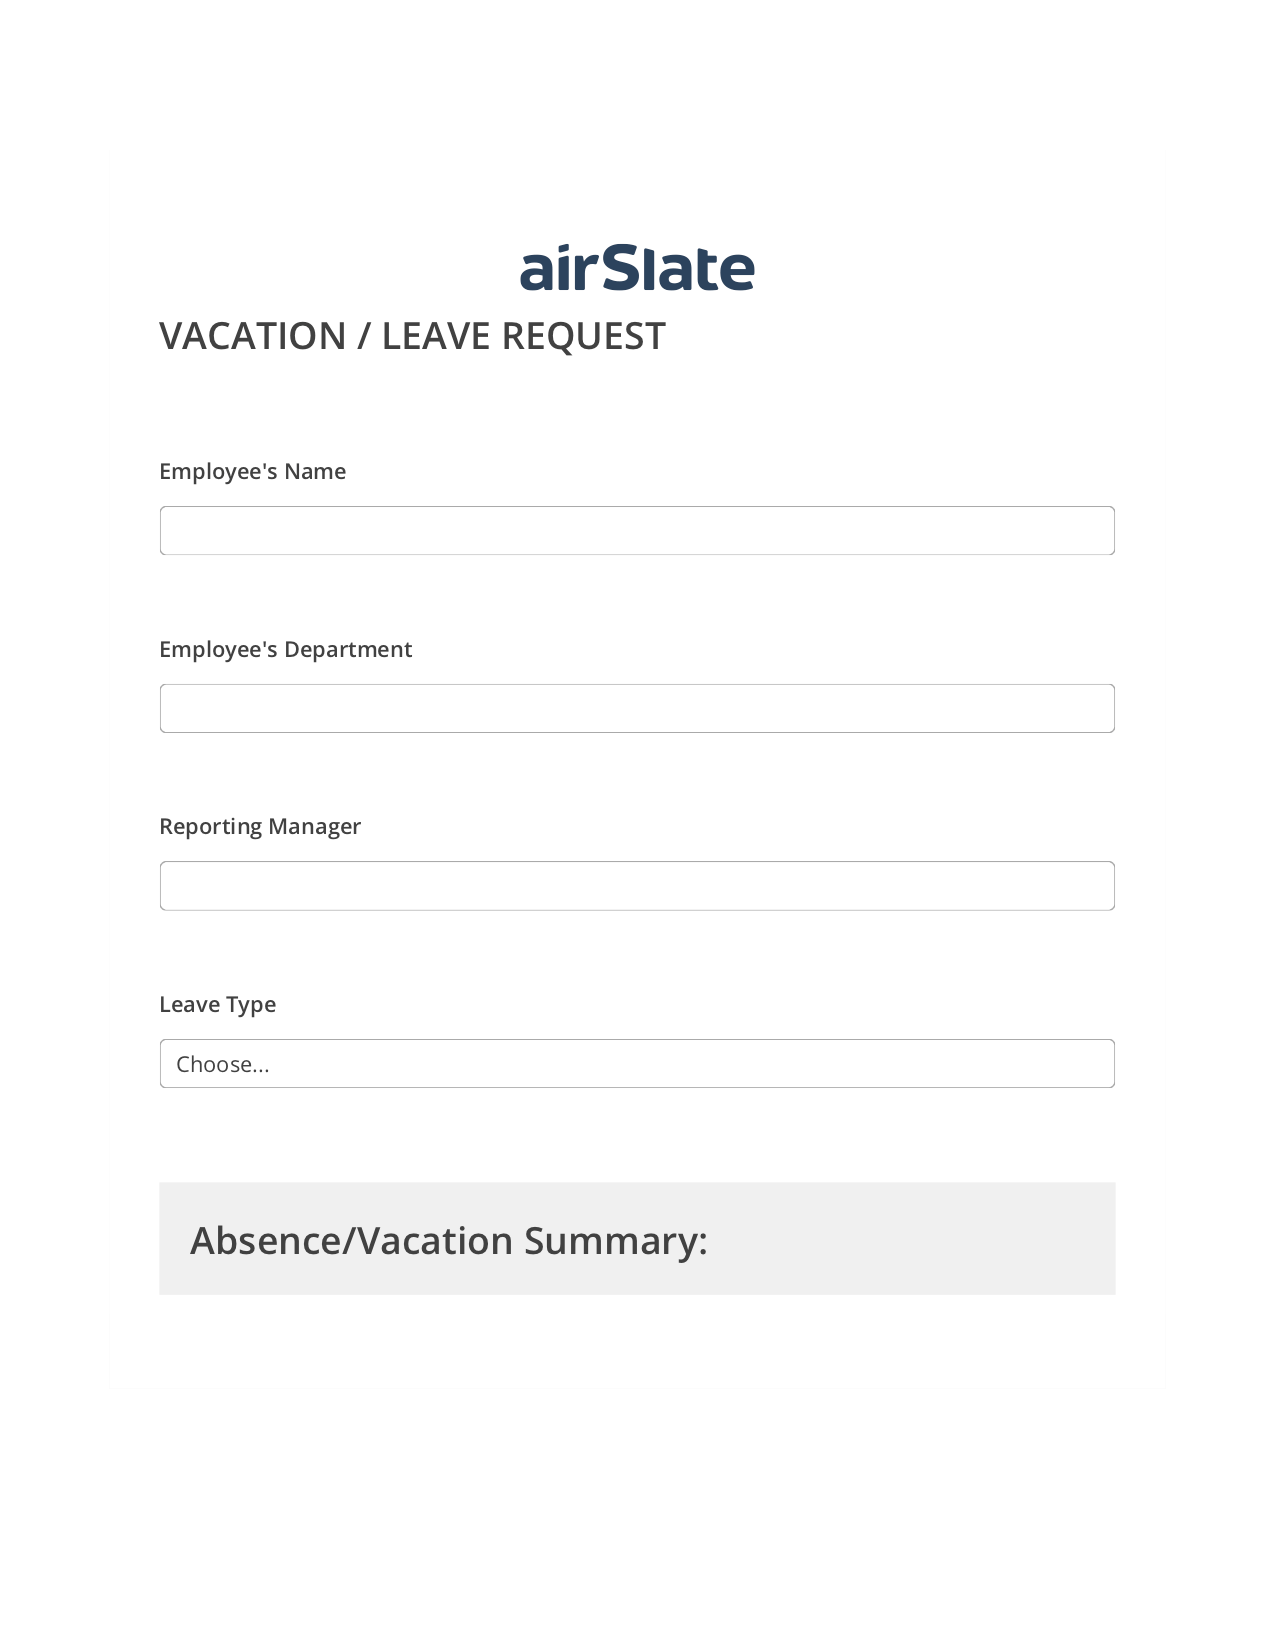 Vacation/Leave Request Flow Update MS Dynamics 365 Record